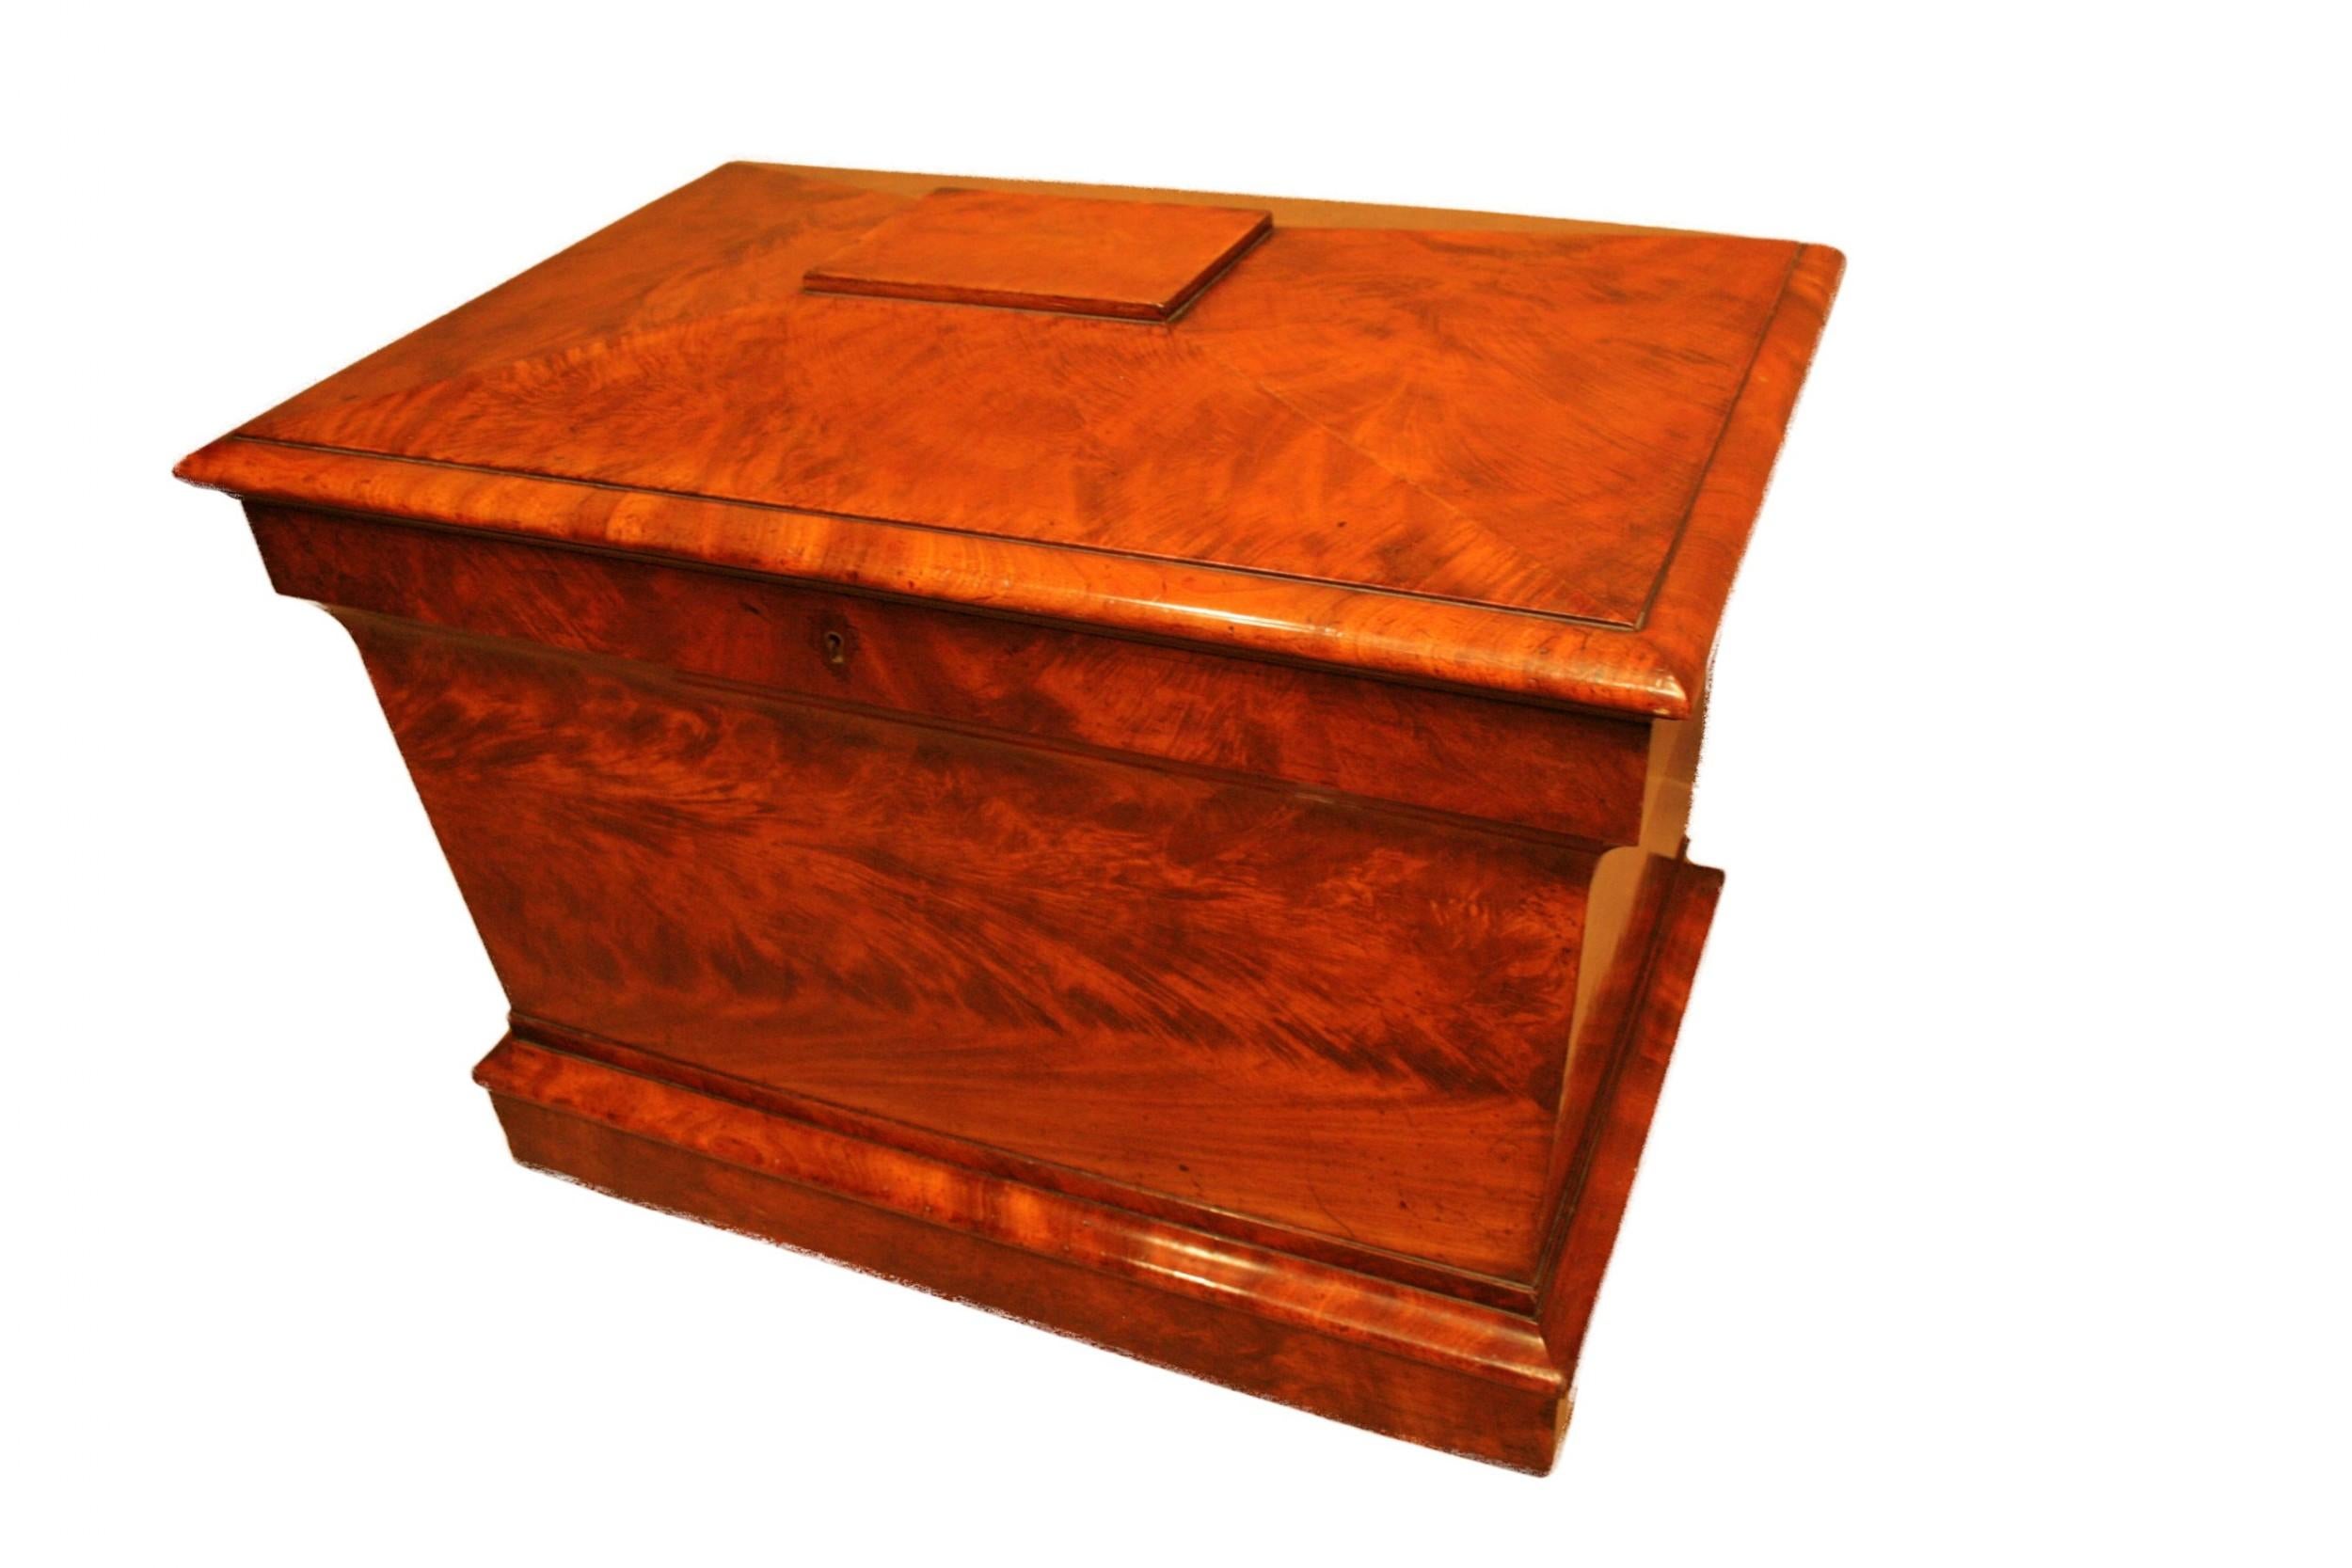 English Early 19th Century George III Flame Mahogany Sarcophagus Wine Cooler For Sale 4